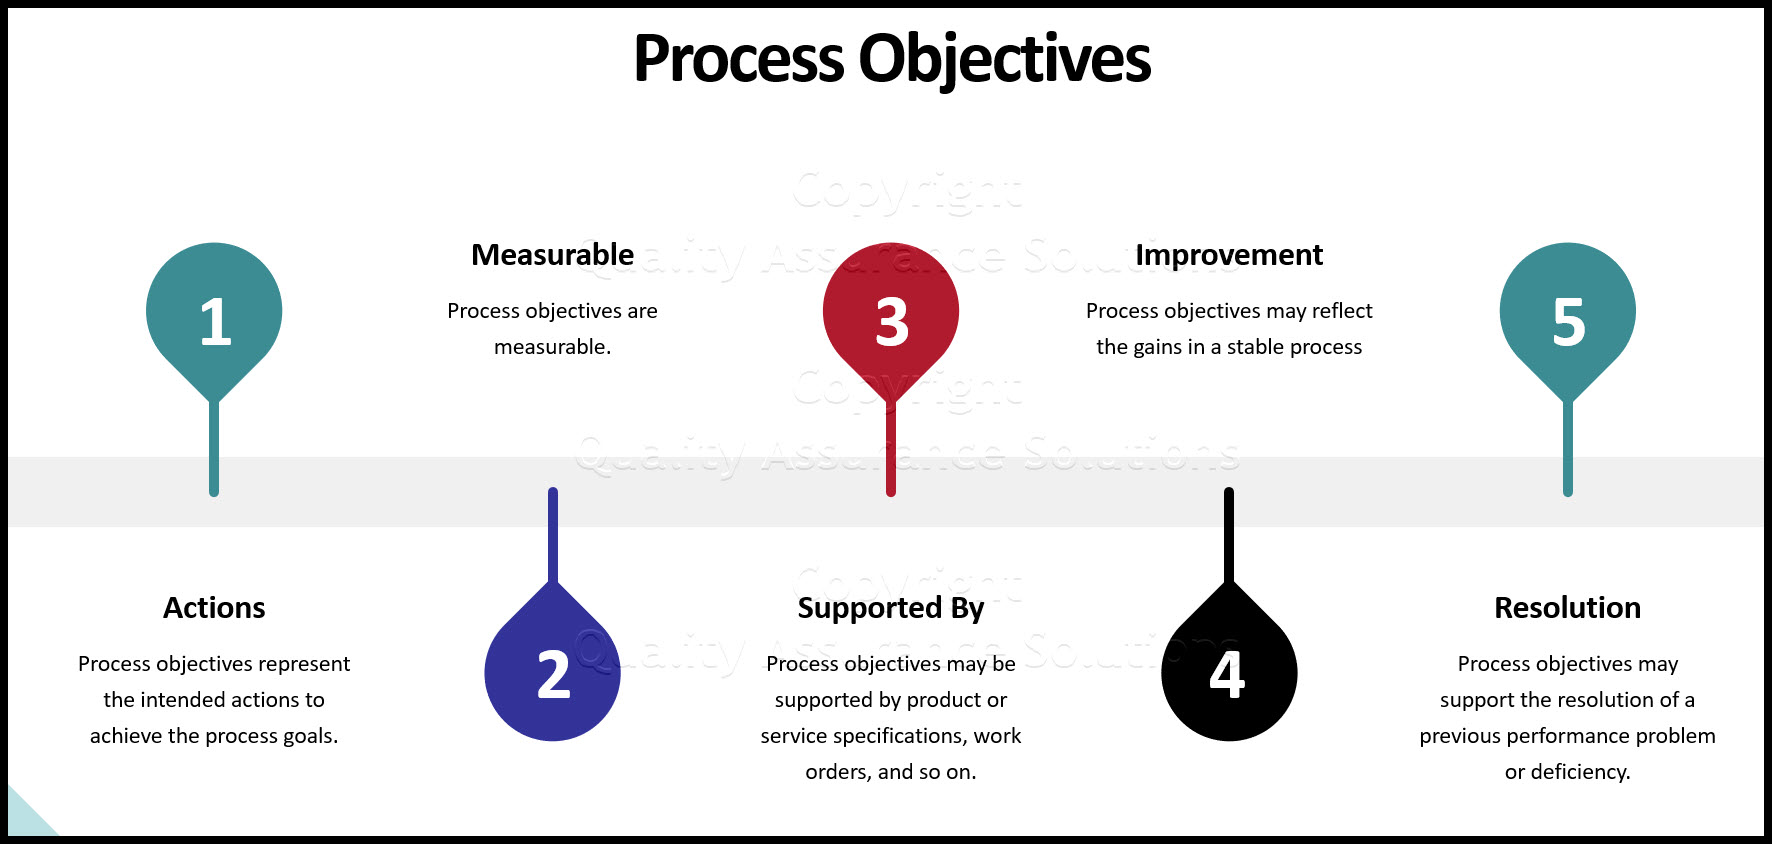 Process planning is the 1st step in Business Process Management